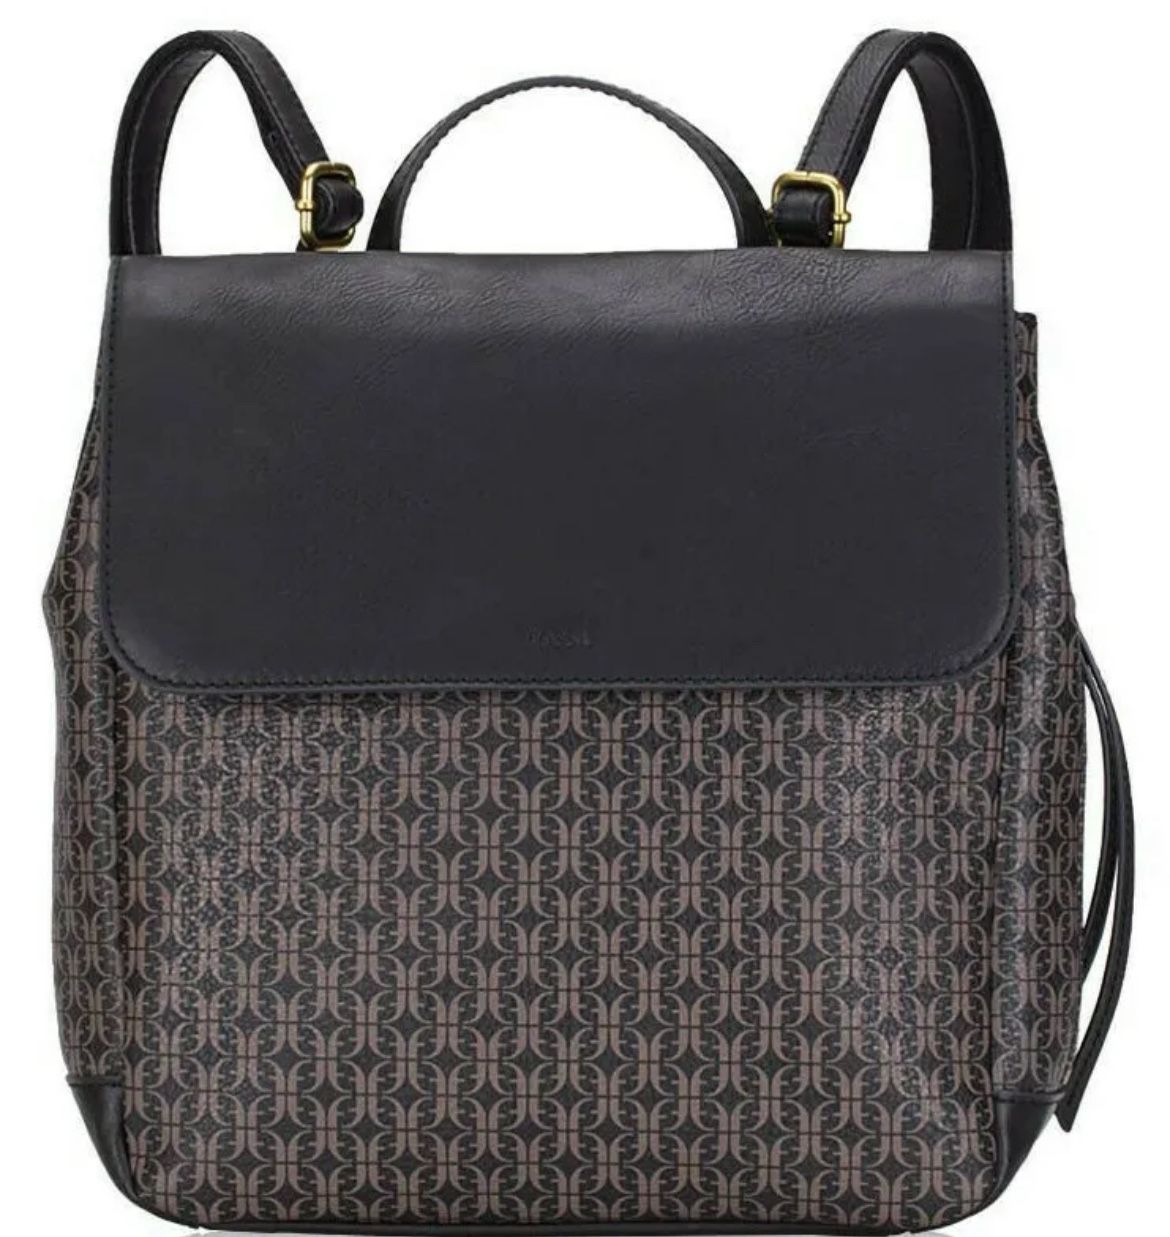 Fossil Claire Black Brown Signature Flap Backpack SHB(contact info removed) NWT $138 Retail FS